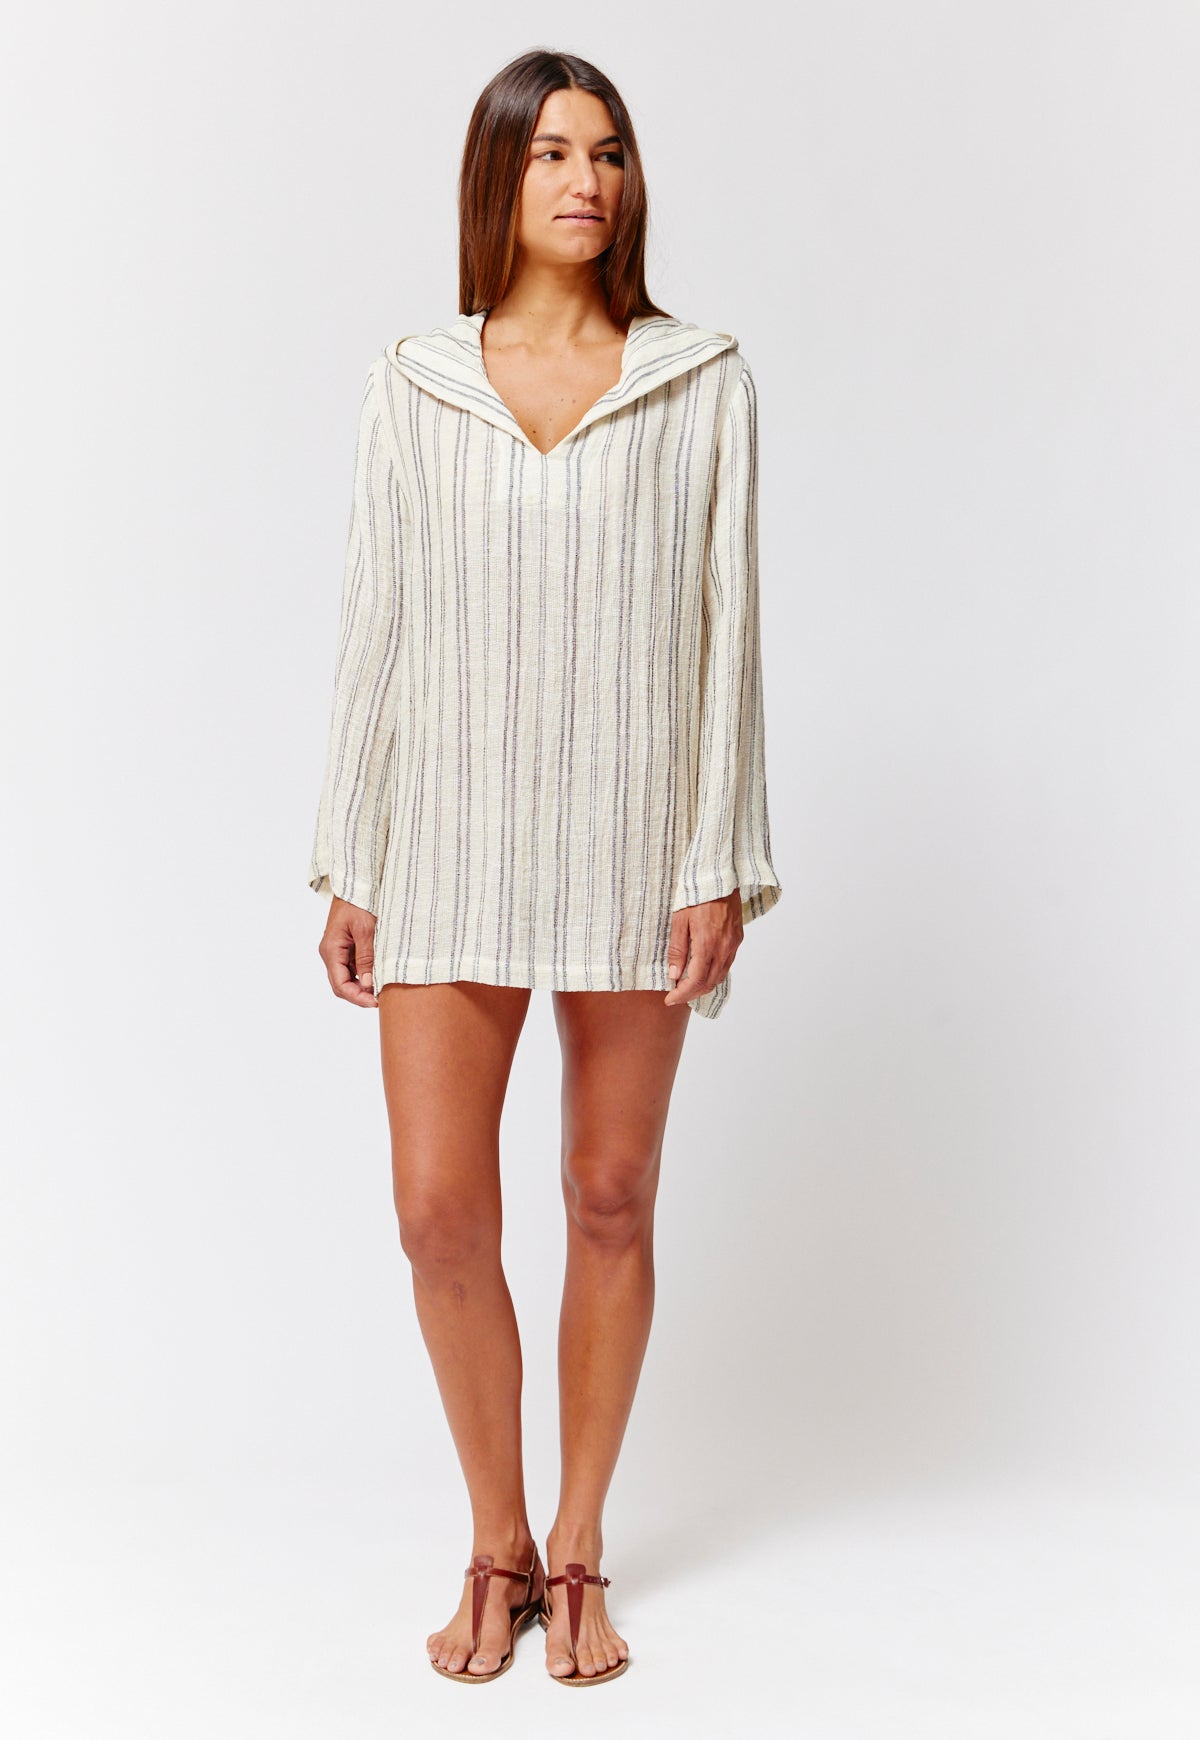 THE BEACH TUNIC in NATURAL & BLACK STRIPED CHIOS GAUZE